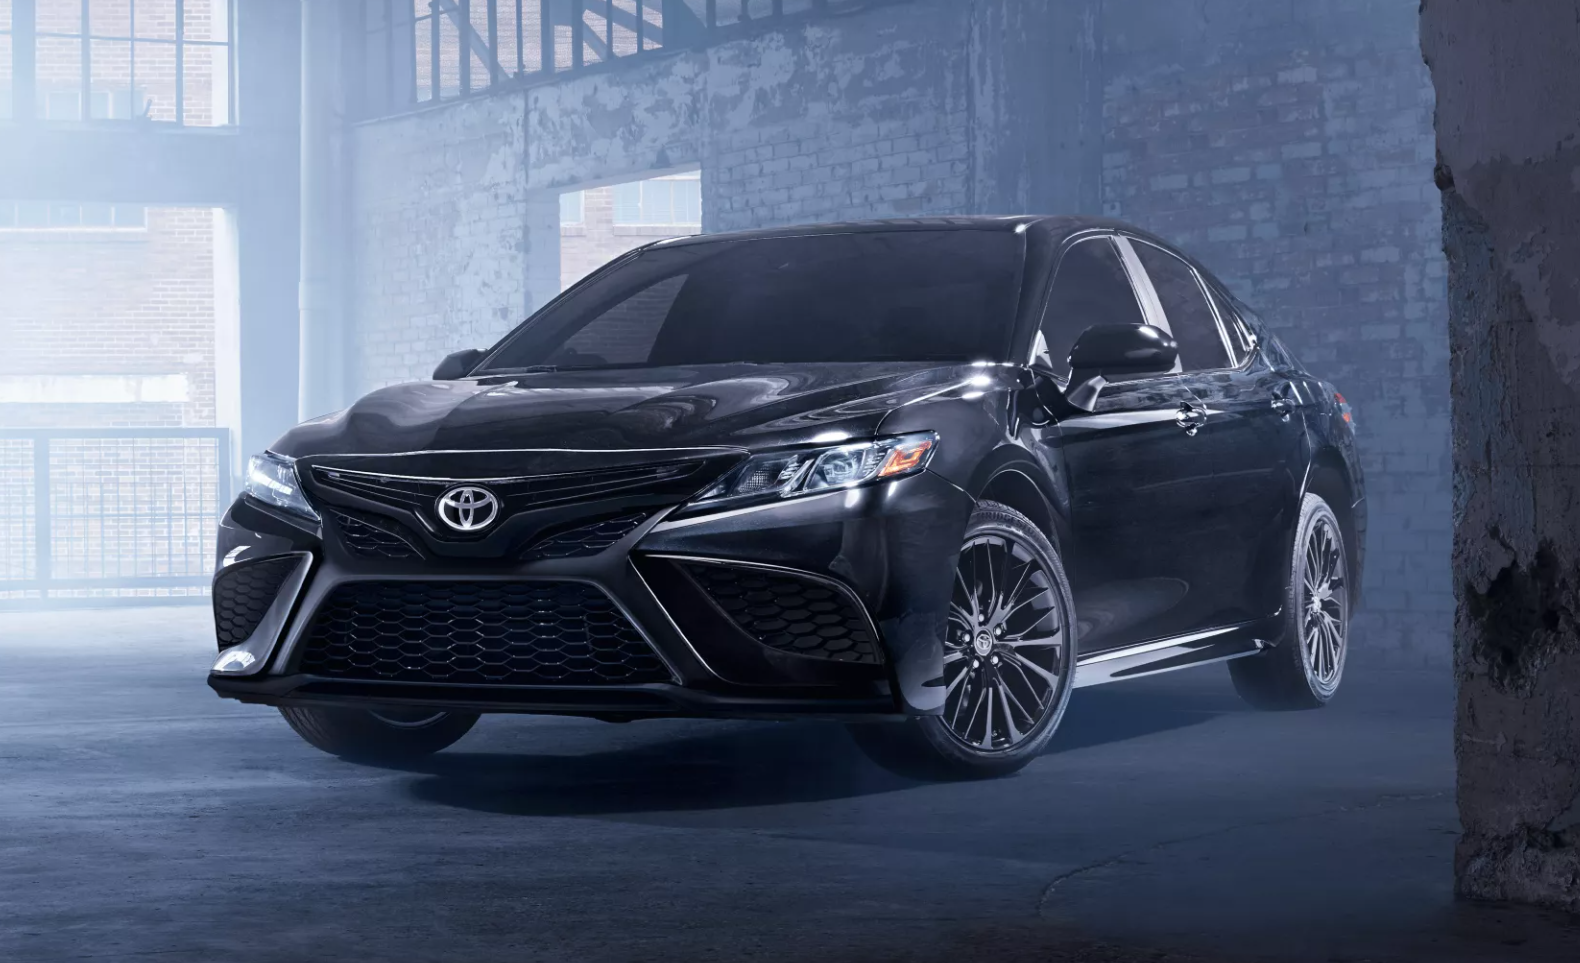 How Much Does a Fully Loaded 2022 Toyota Camry Cost?